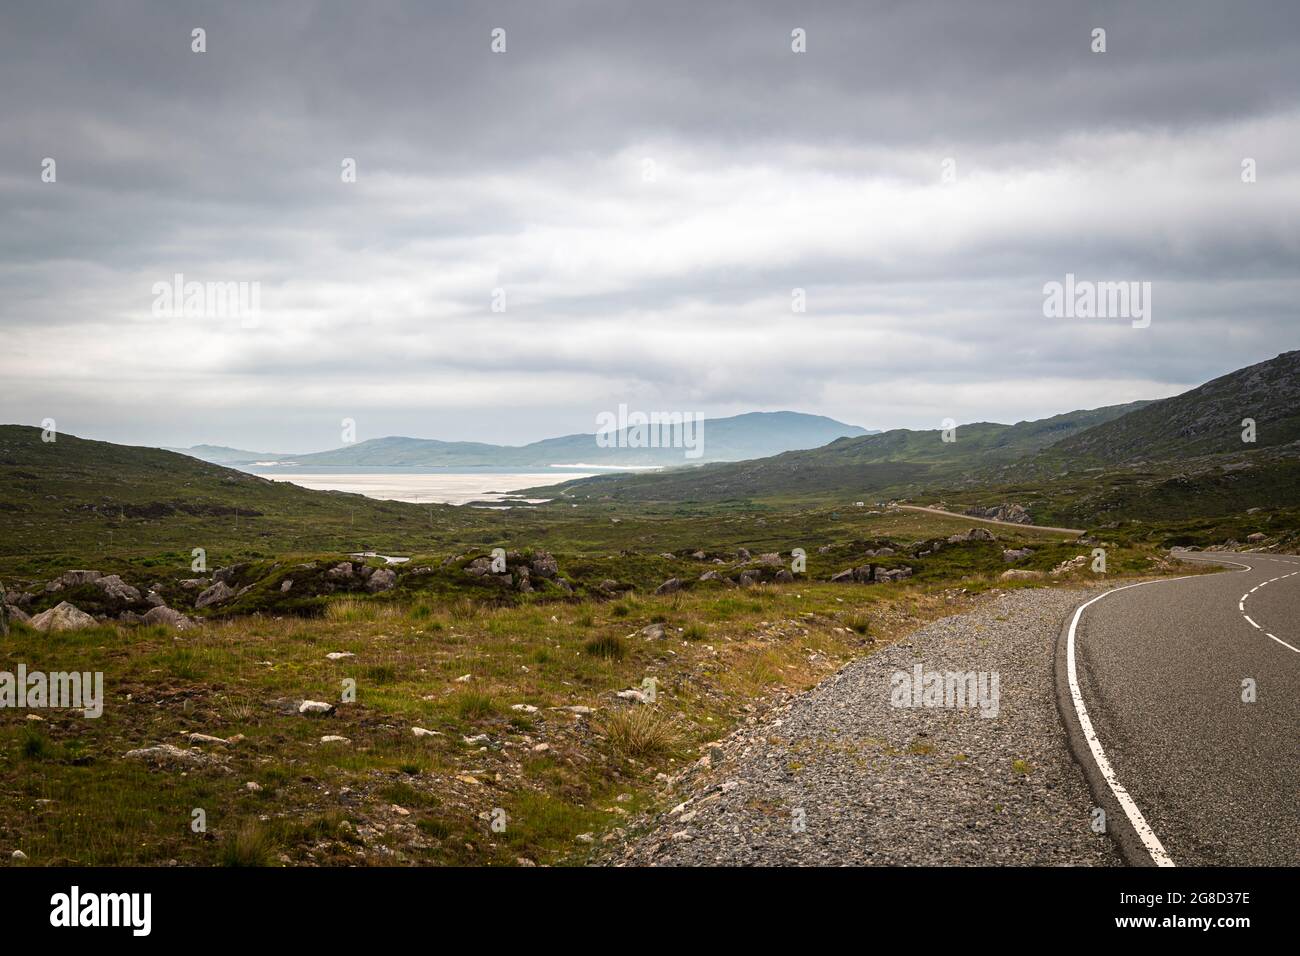 A summer 3 shot HDR image of the A859, first view and approach road to Luskentyre Beach, Isle of Harris, Western Isles, Scotland. 29 June 2021 Stock Photo